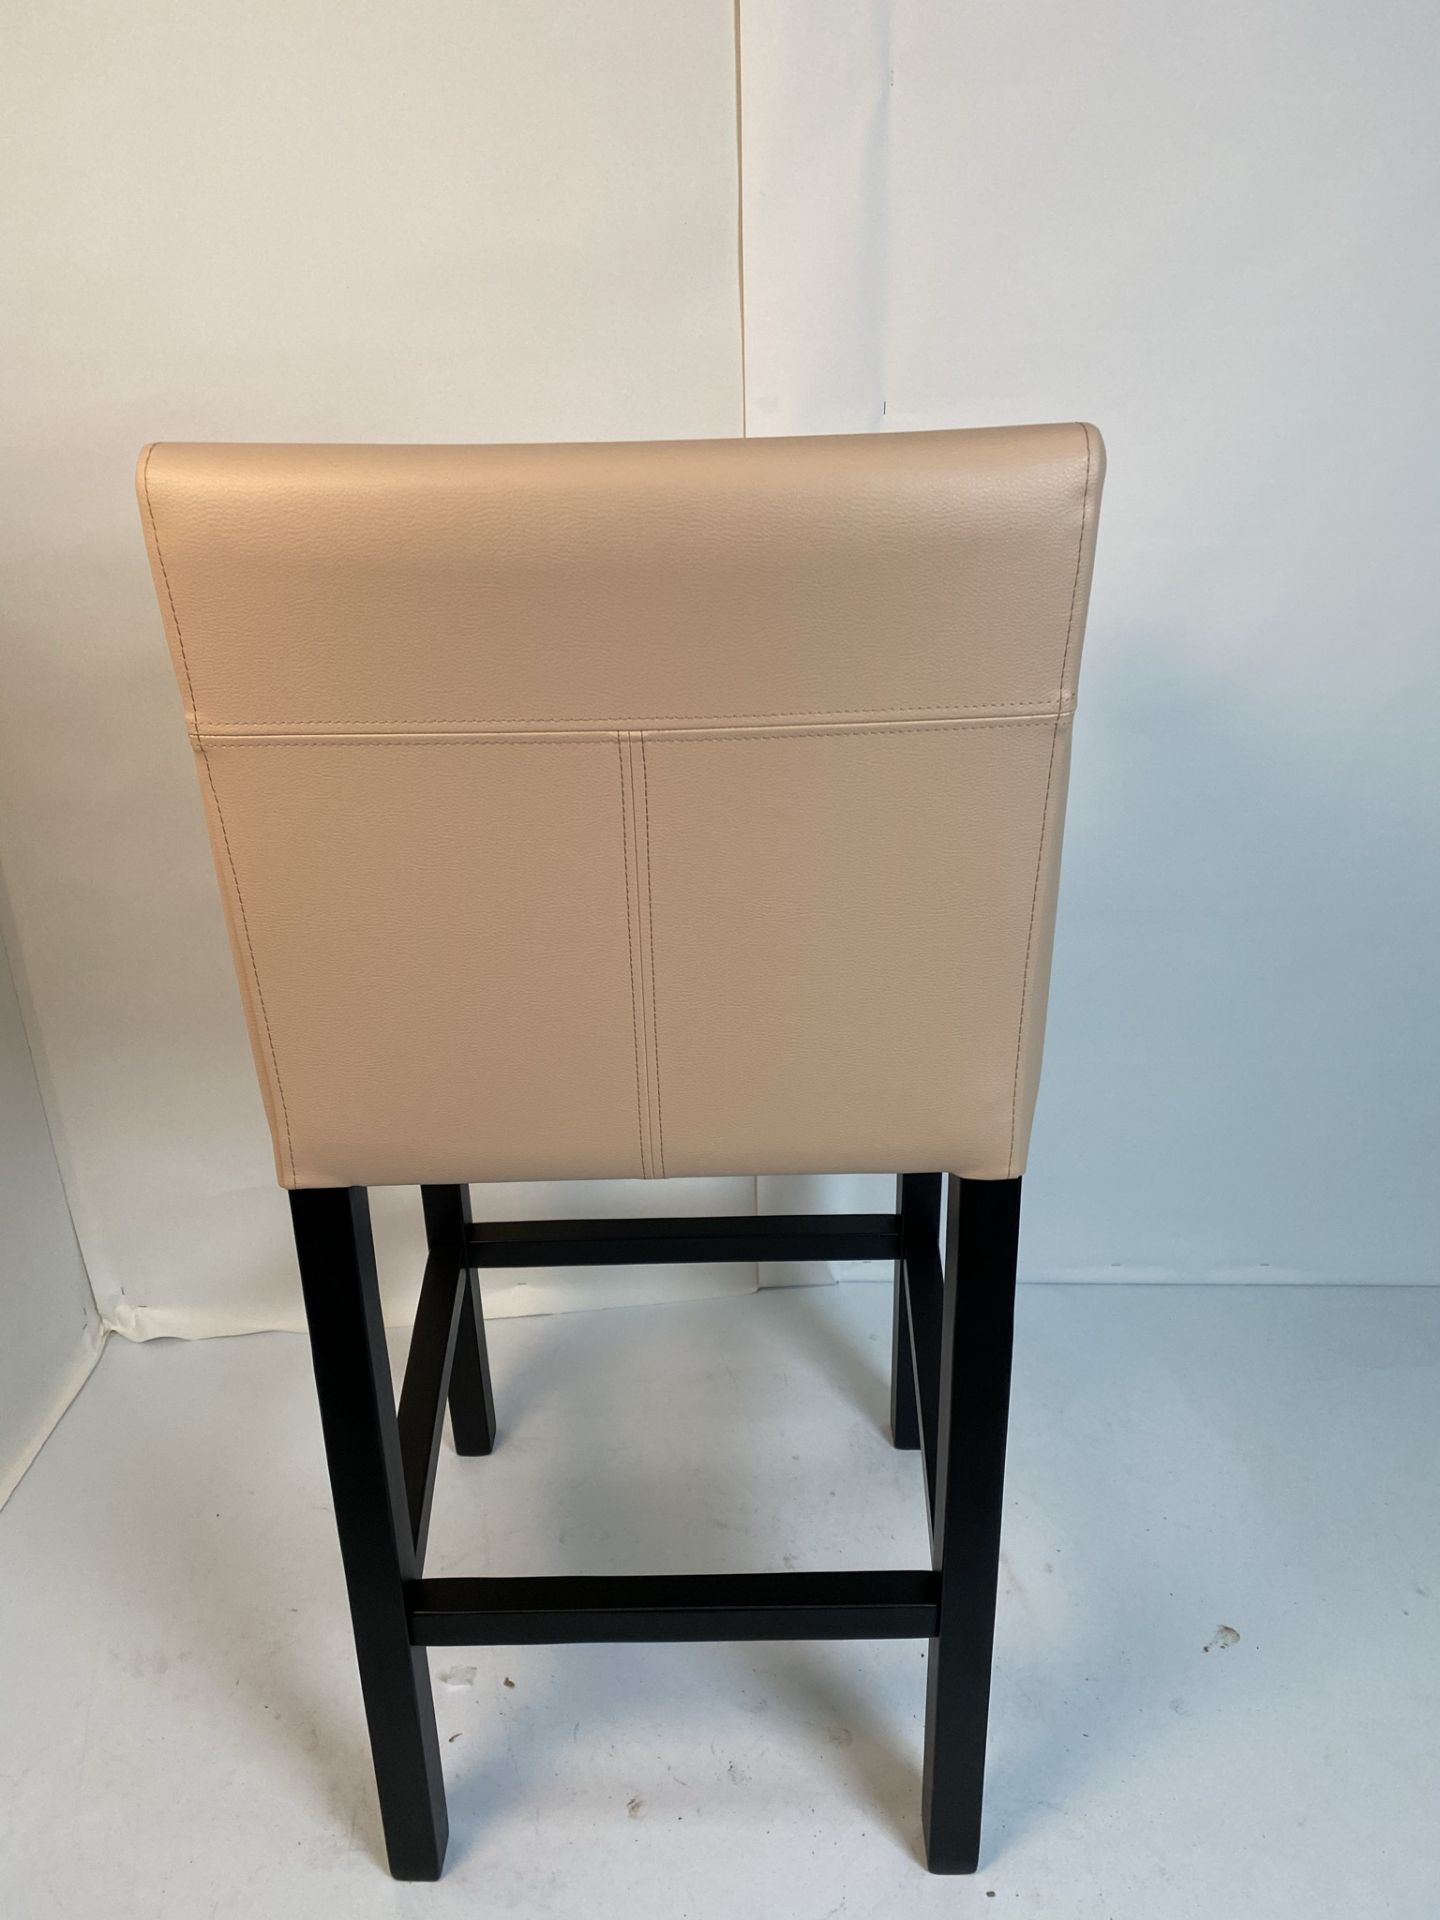 A Vista Vena BE-10 Cappuchino high stool with black wood frame - Image 5 of 8